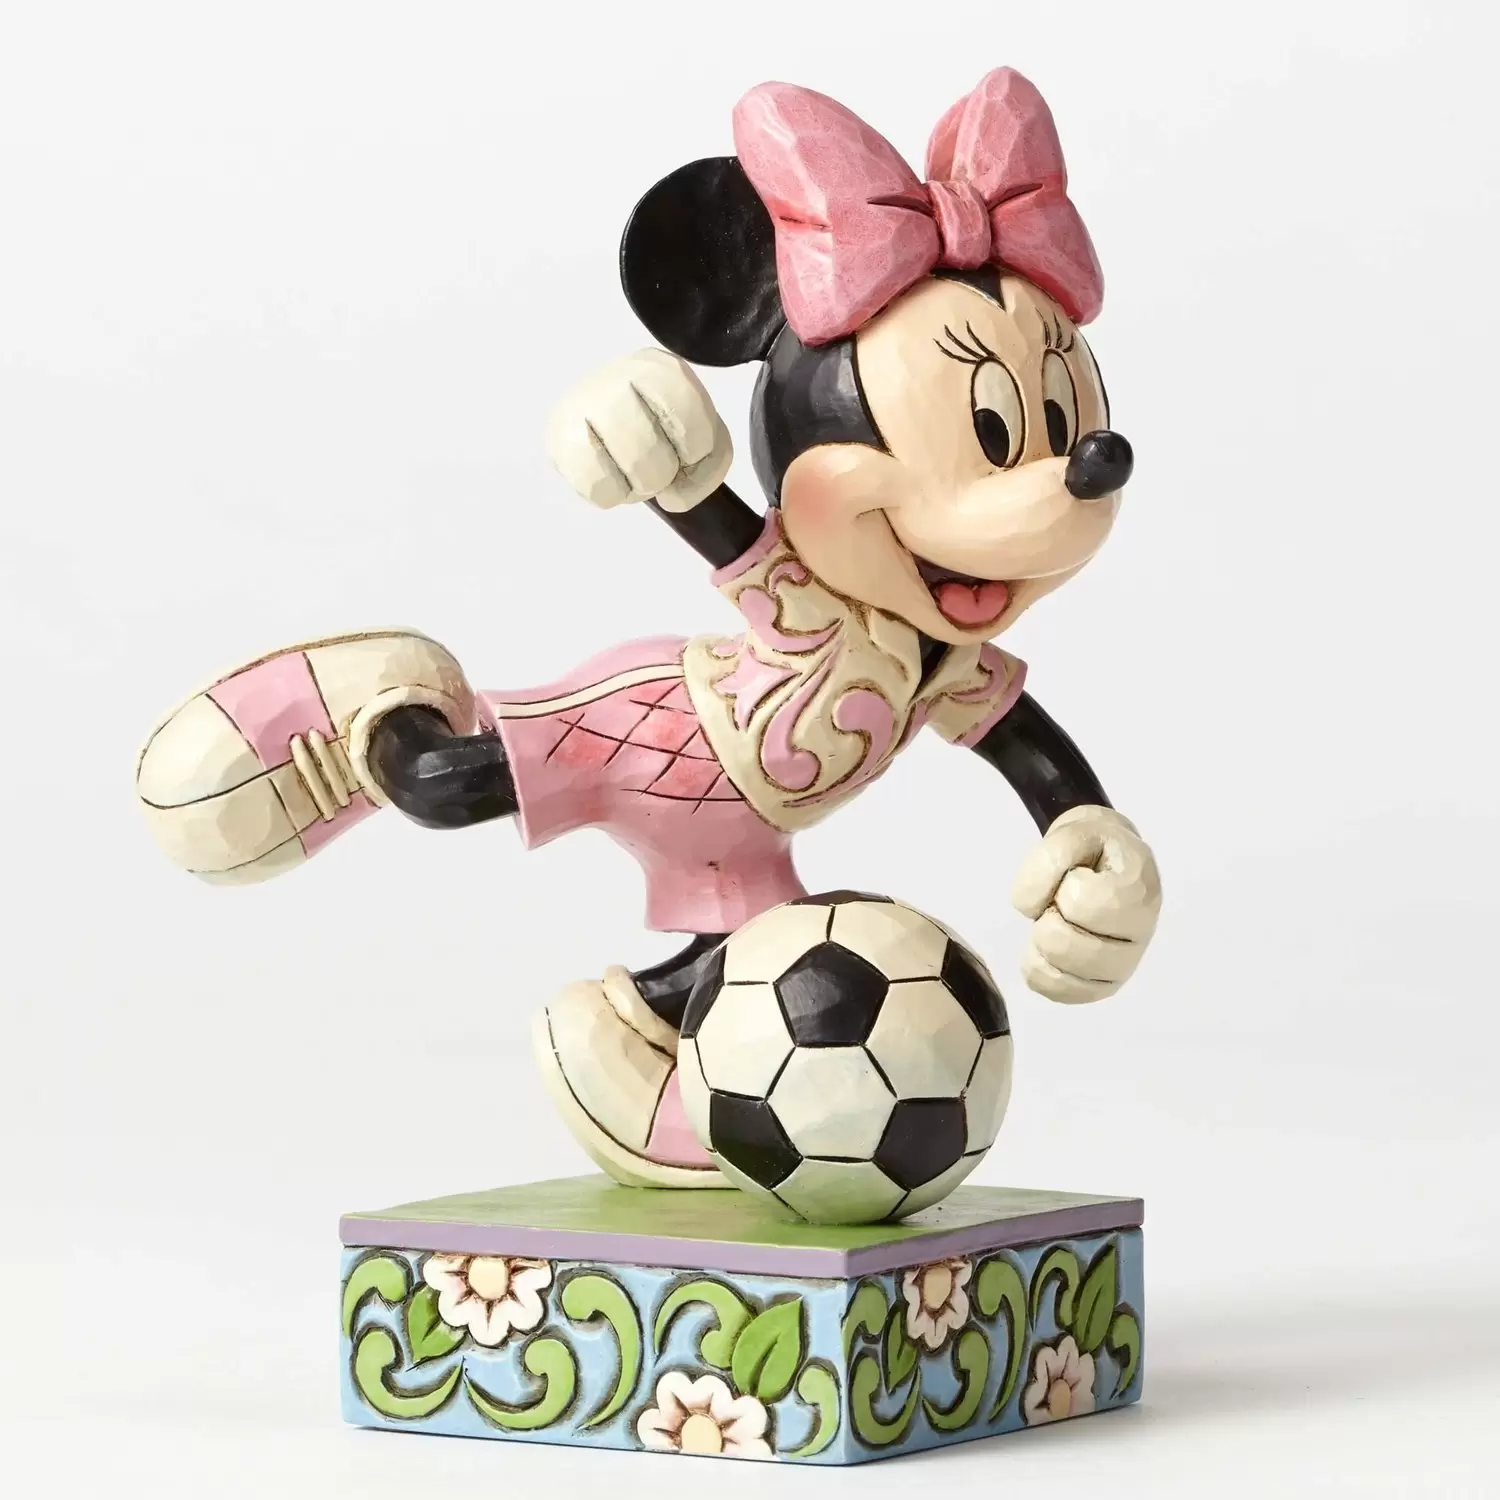 Disney Traditions by Jim Shore - Goal! - Soccer Minnie